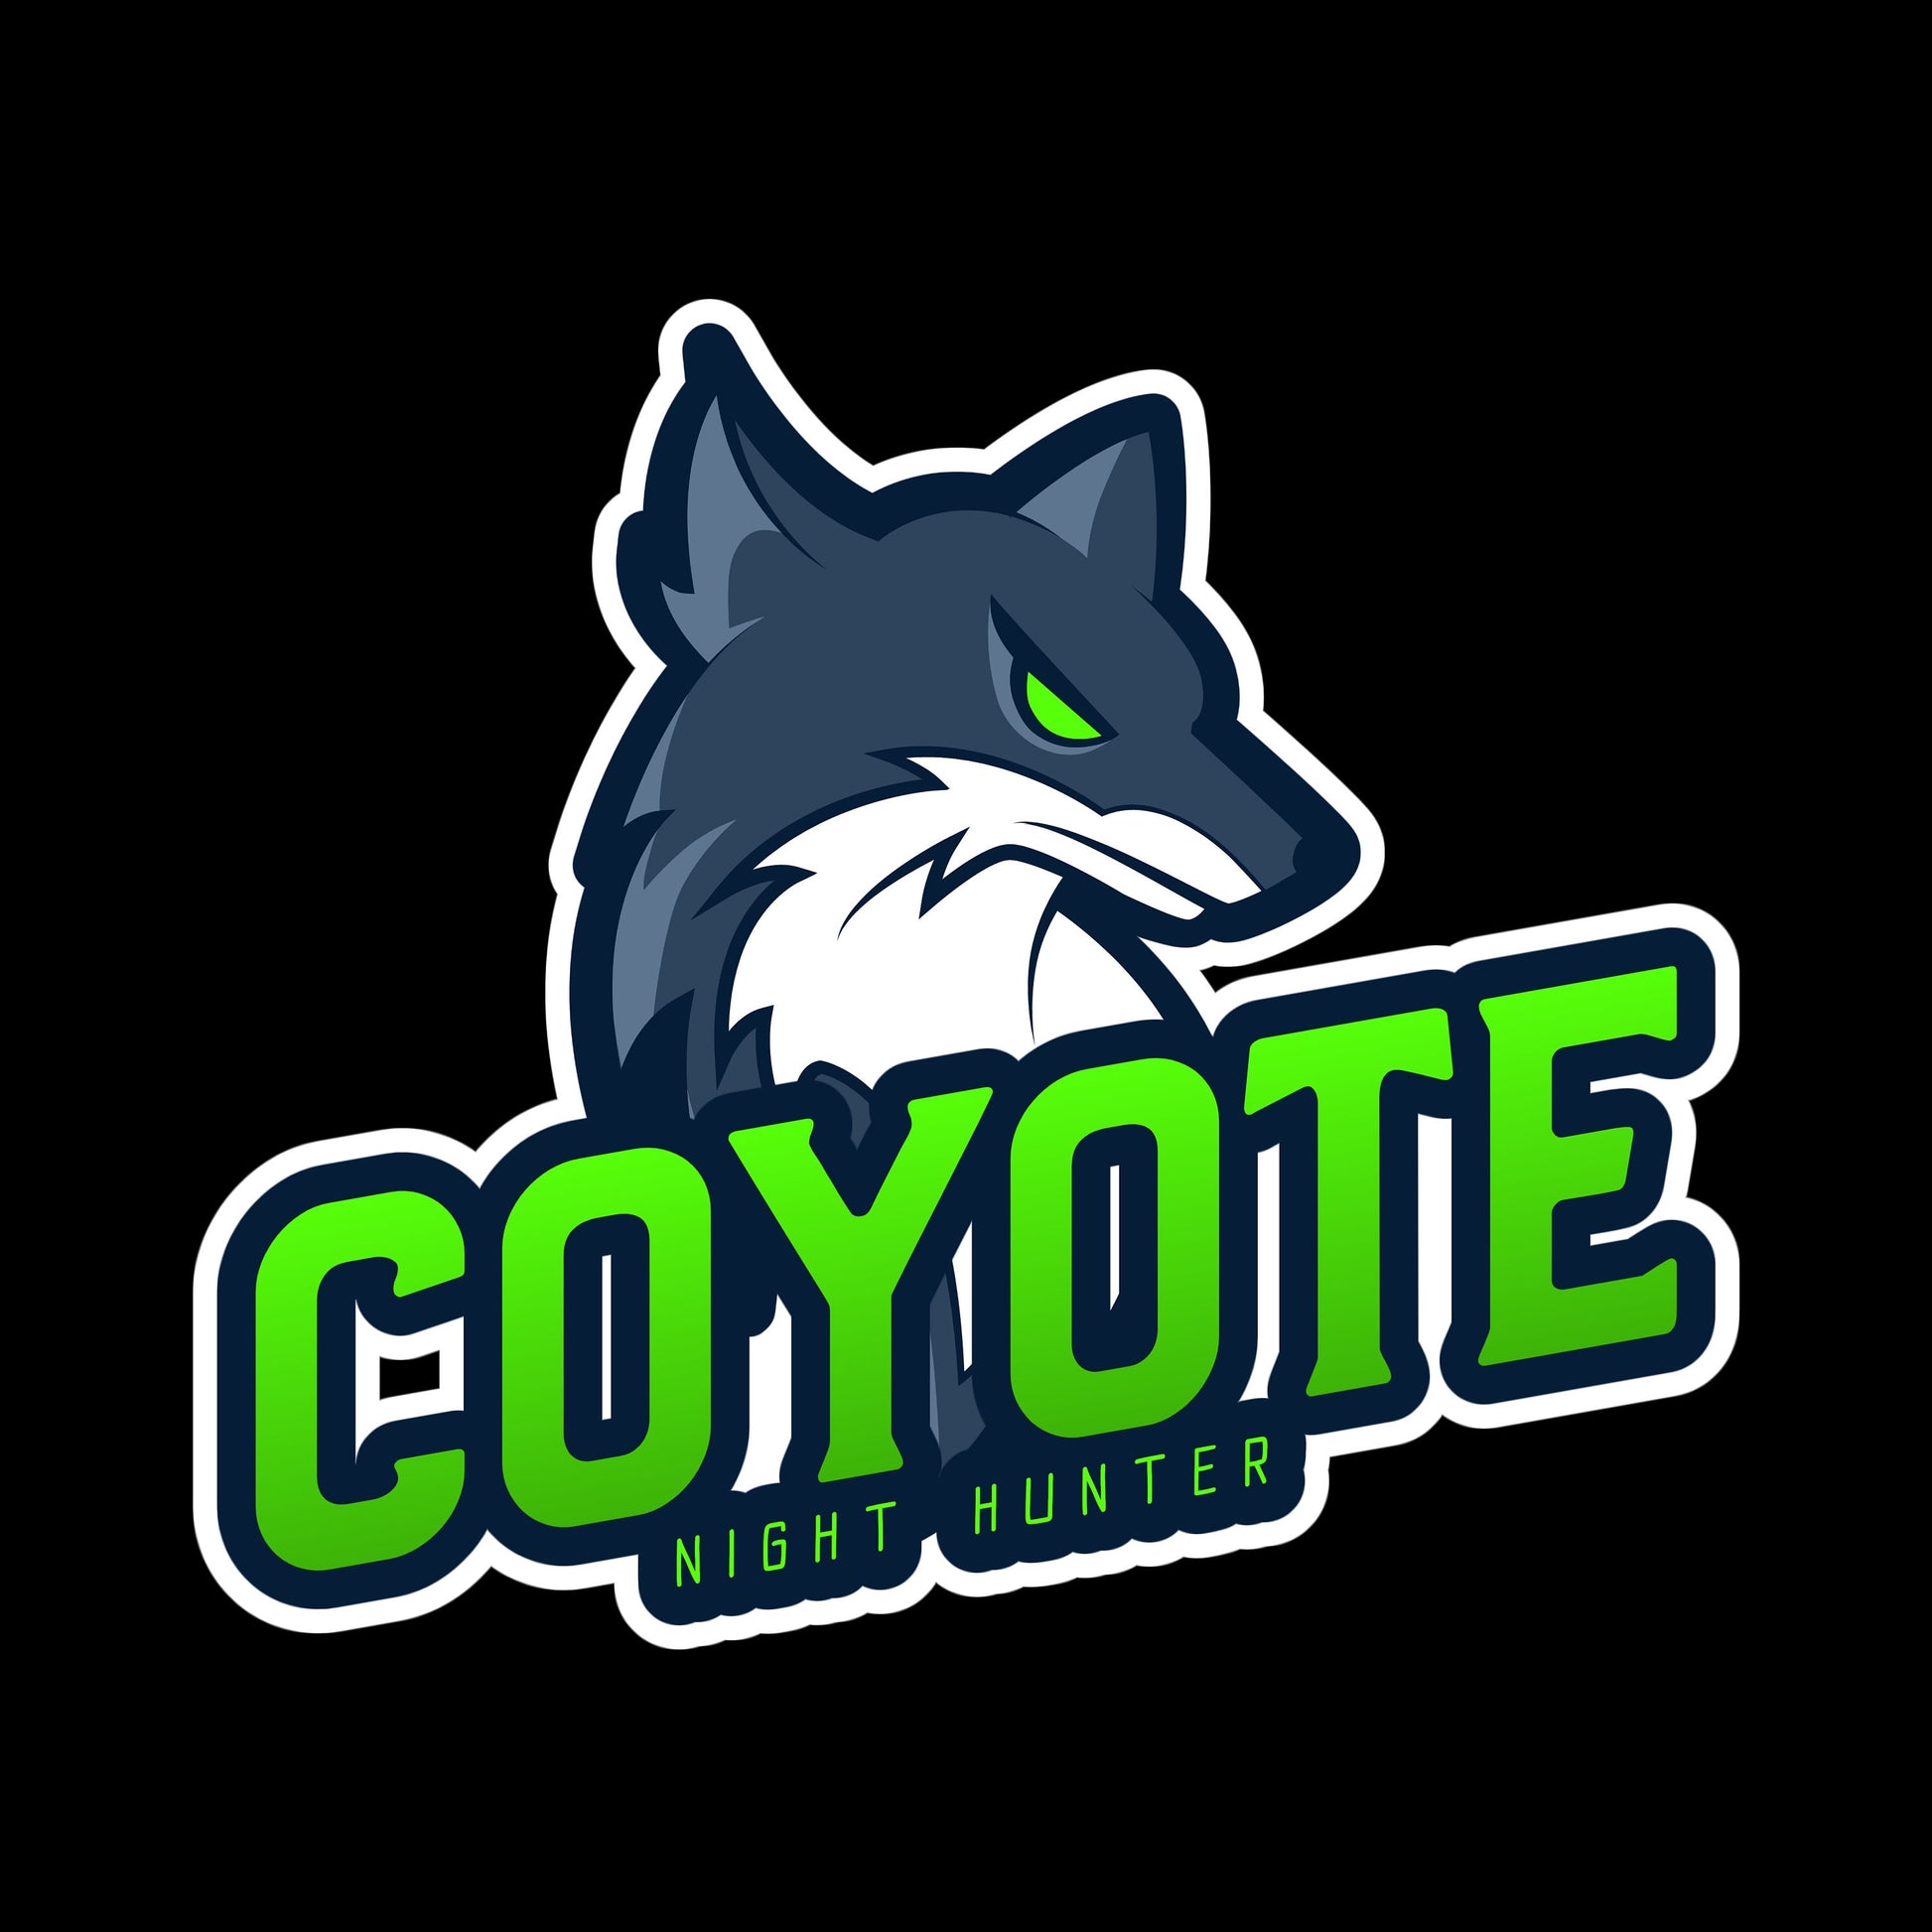 Coyote Night Hunter Sticker Decals for Thermal and Night Vision Coyote and Predator Calling Hunters